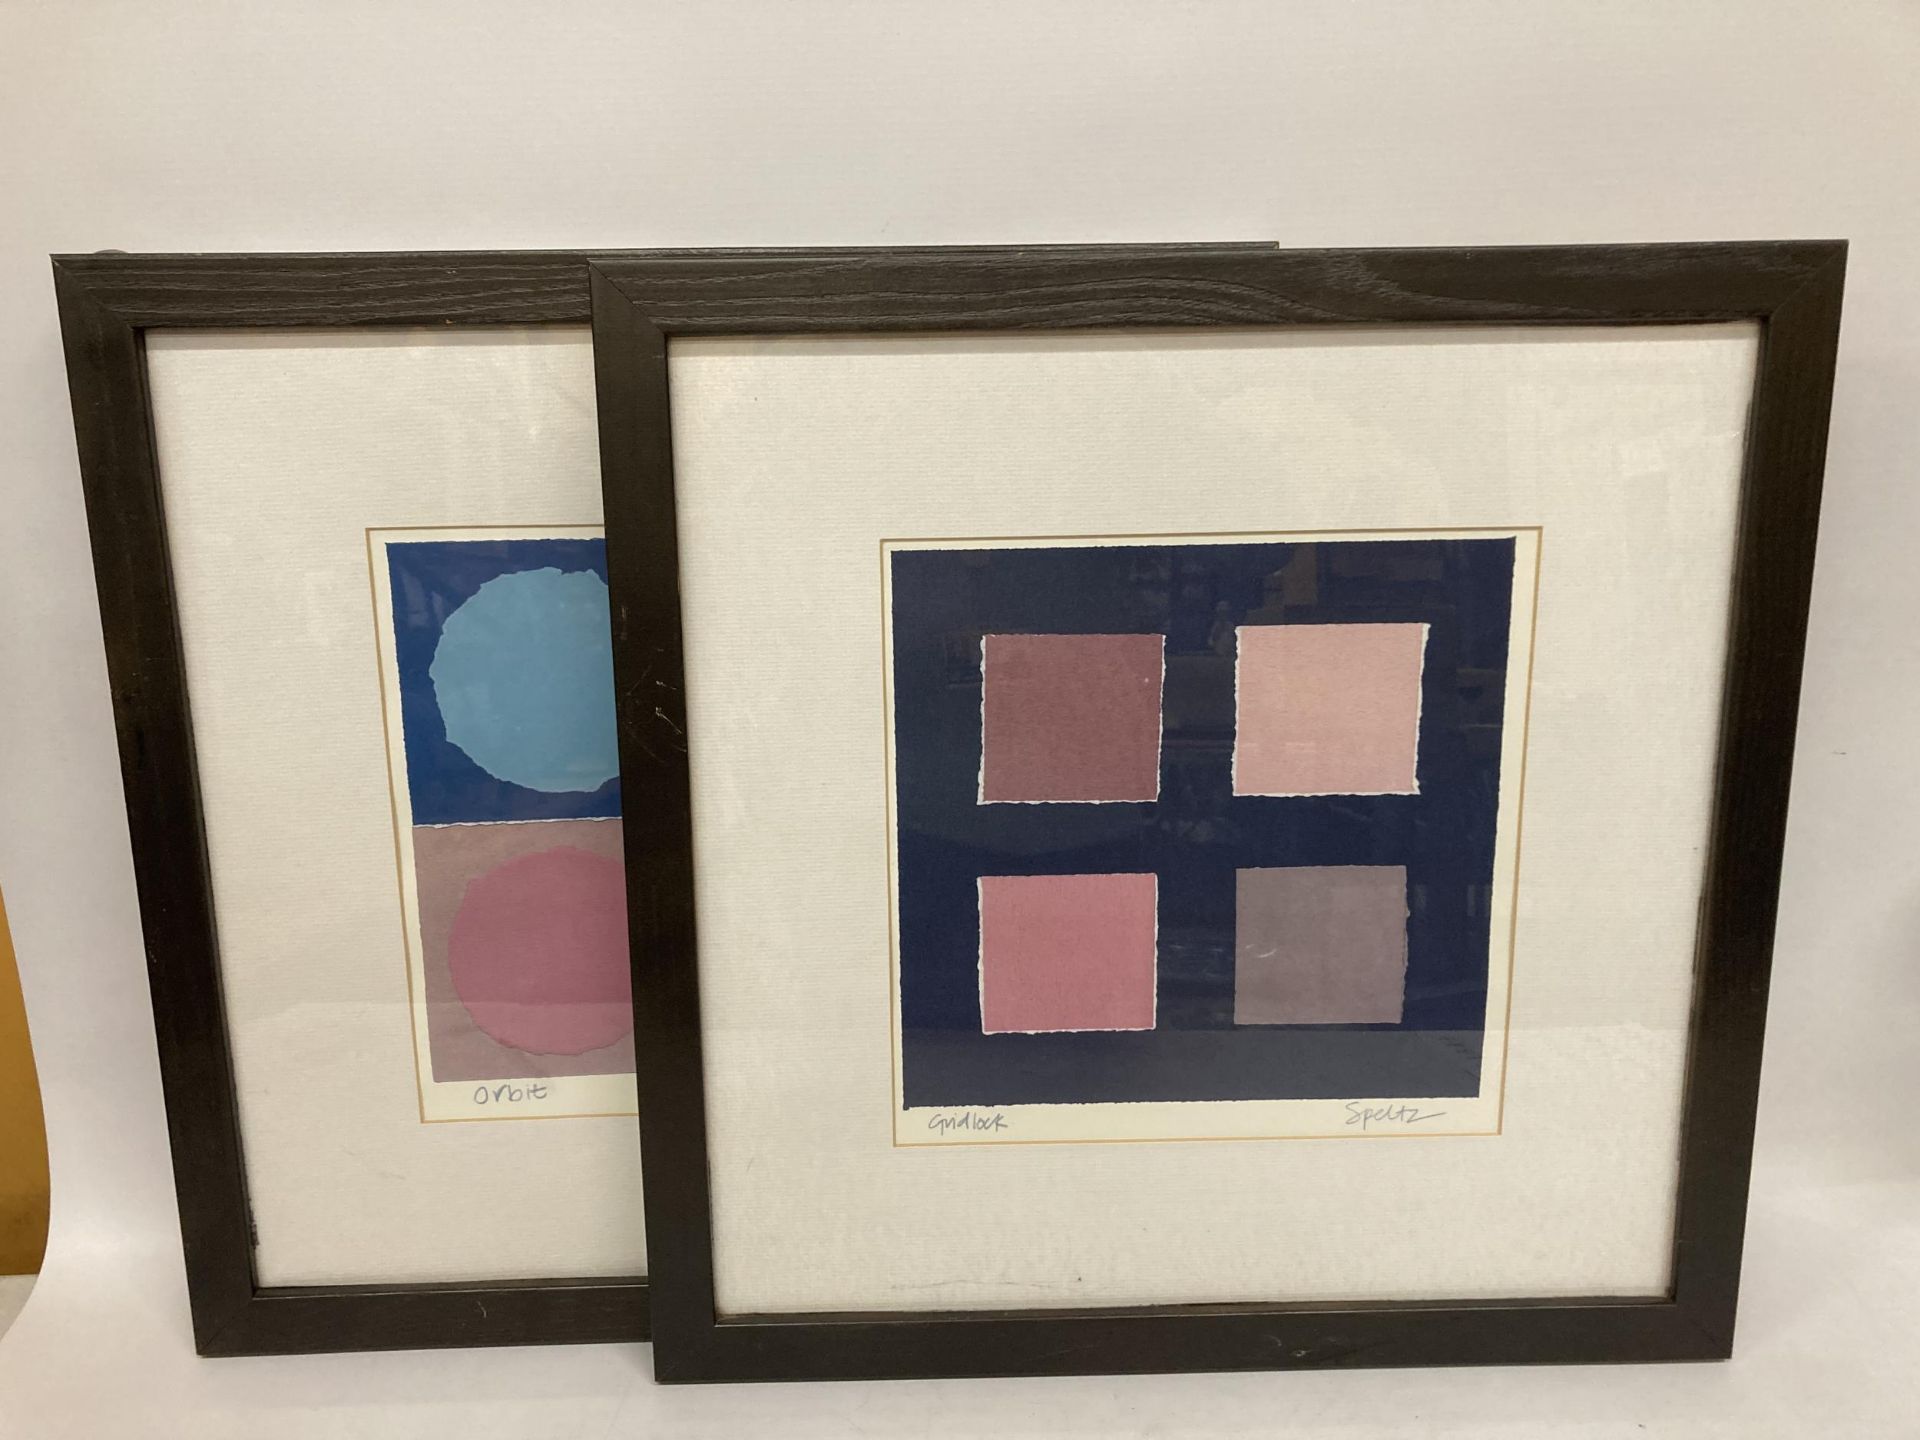 A PAIR OF ROY SPELTZ, AMERICAN ARTIST, PENCIL SIGNED ABSTRACT PRINTS